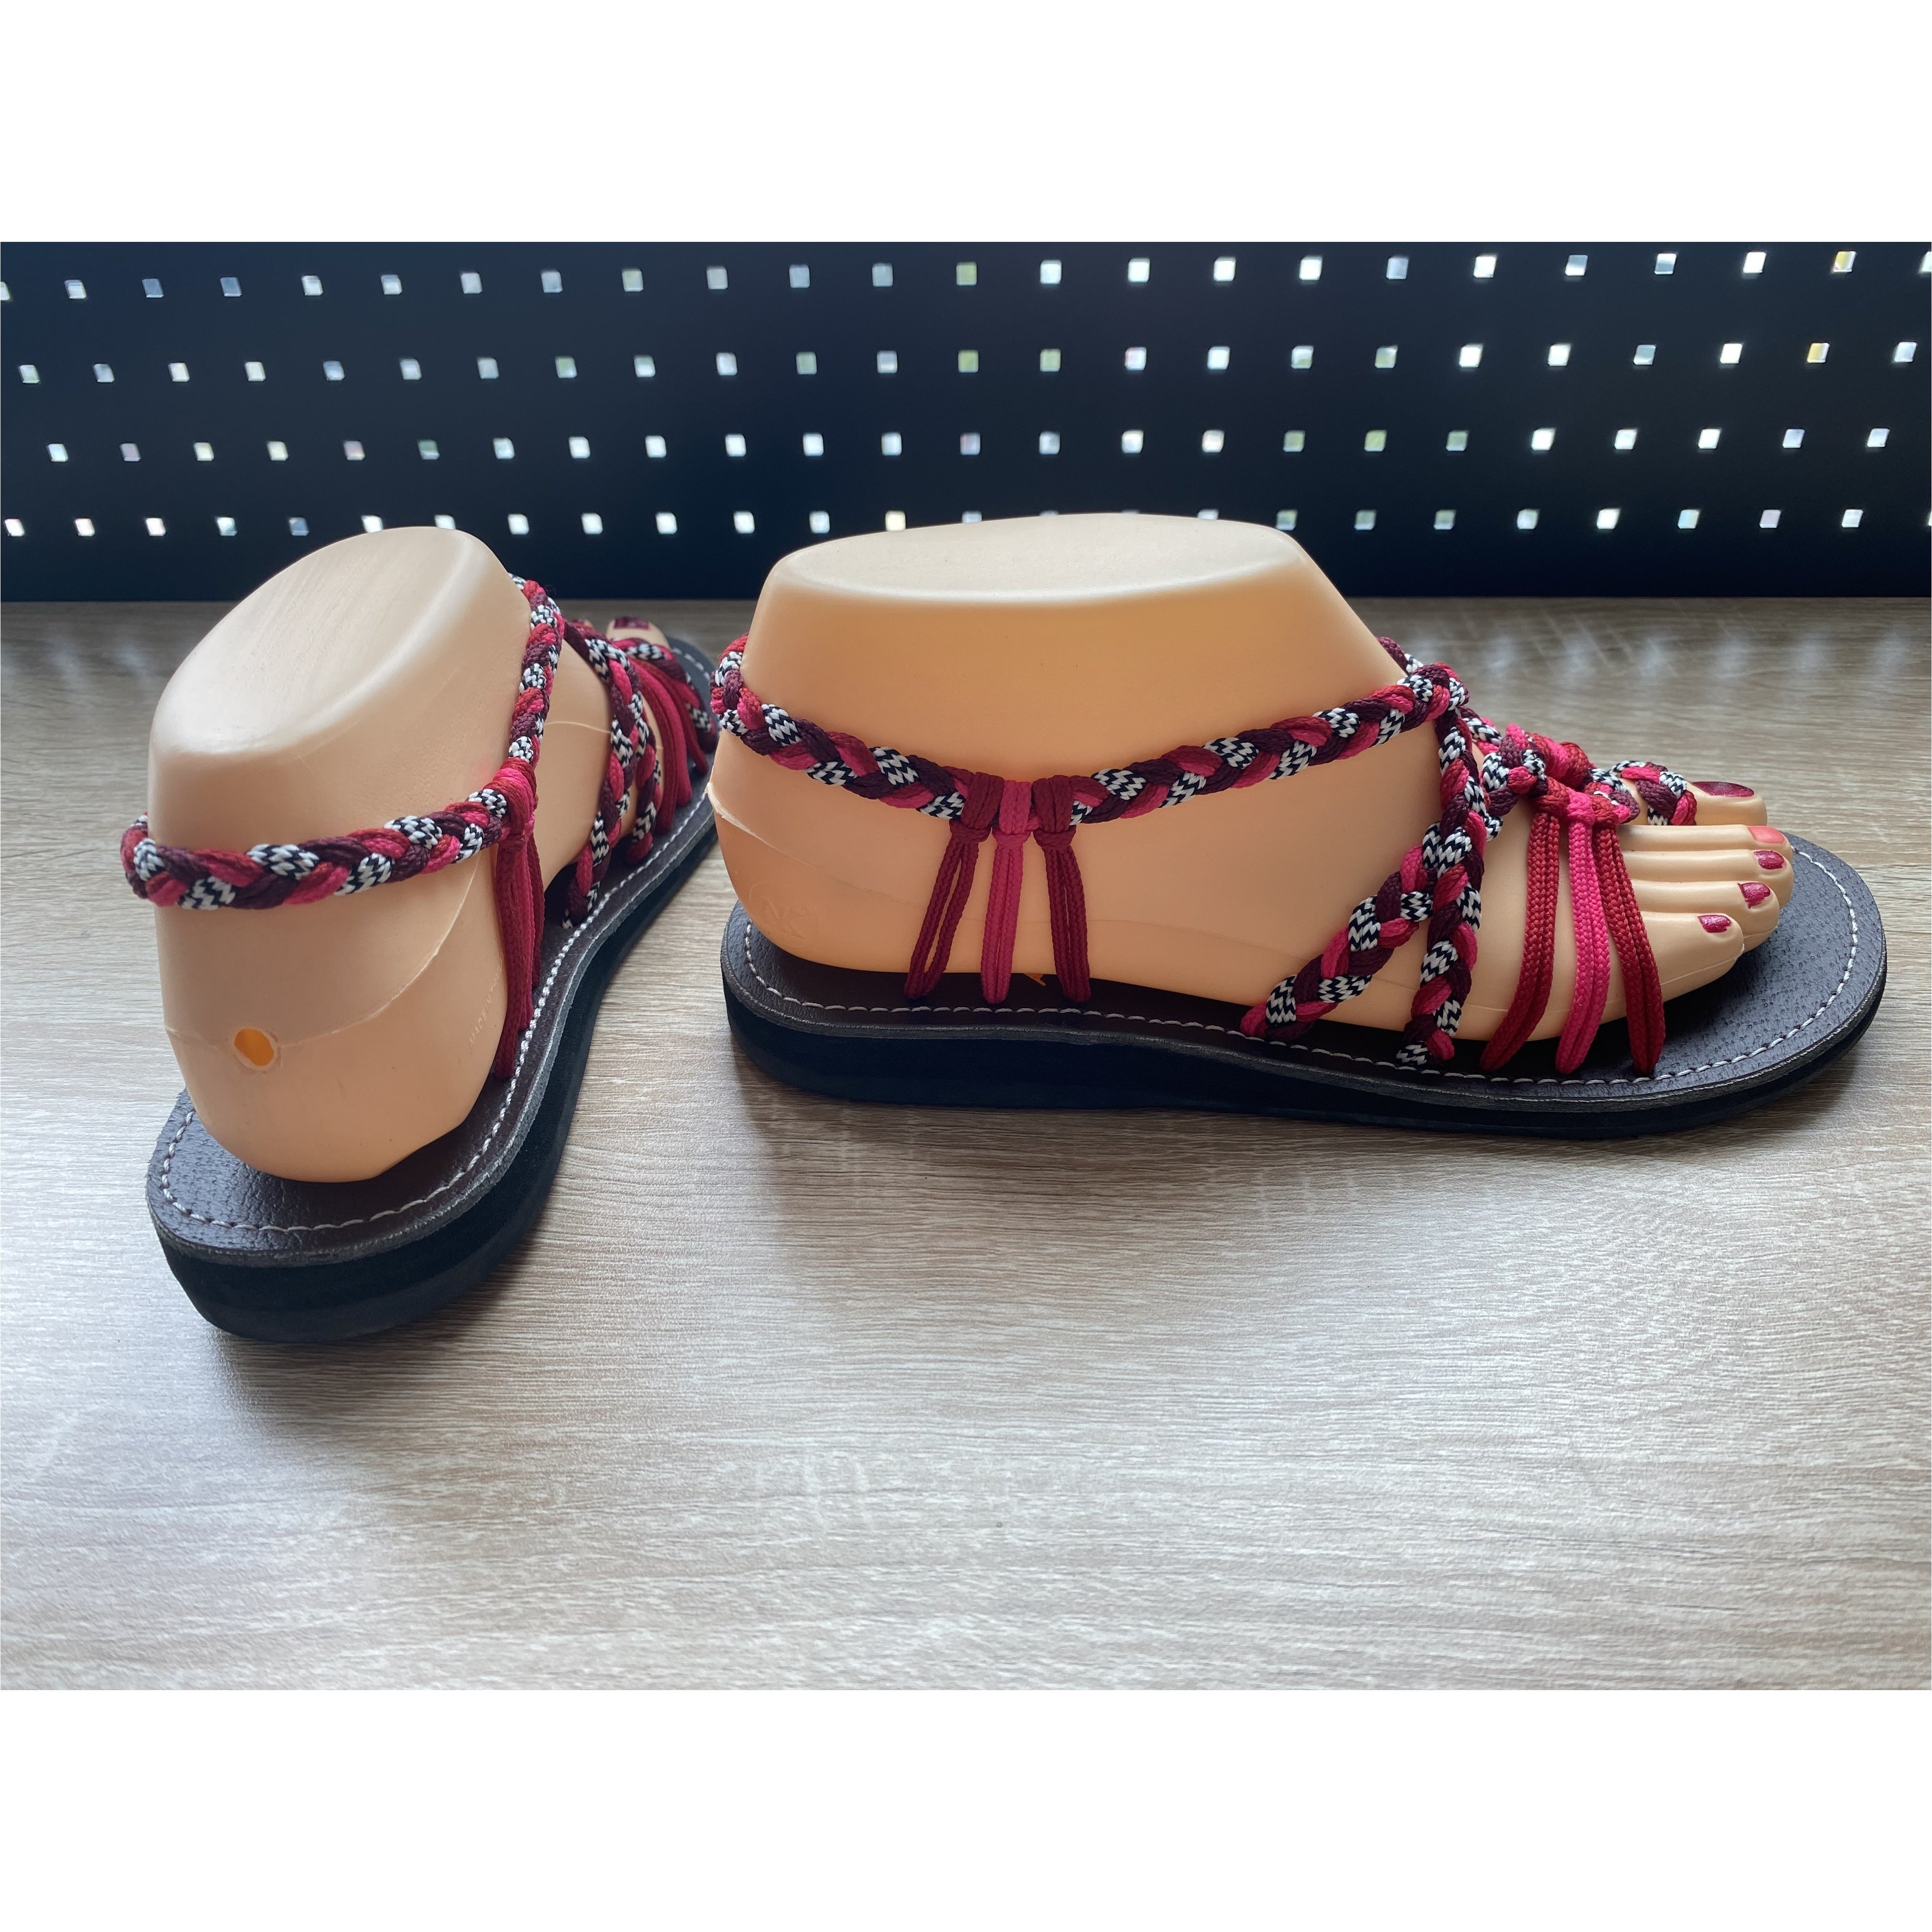 Shoes - Braided Sandal RED/PINK